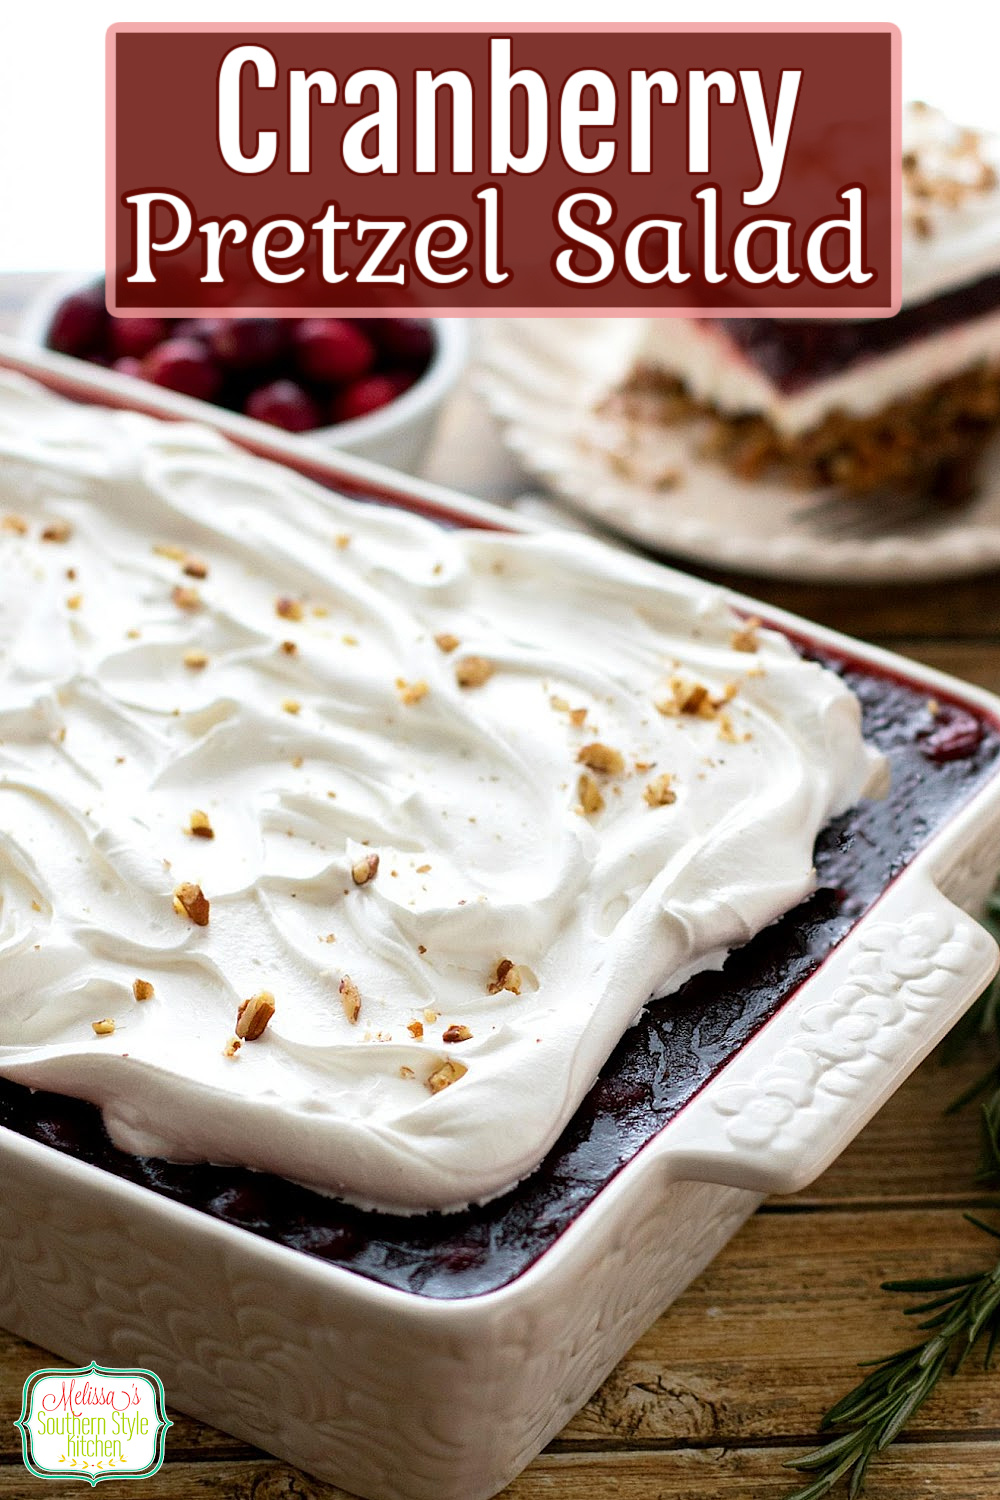 Enjoy this Cranberry Pretzel Salad as a side dish or a sweet and salty holiday dessert #cranberrypretzlesalad #cranberries #pretzelsalad #sweets #thanksgiving #Christmas #holidaysidedishes #desserts #sidedish #cranberrydesserts #strawberrypretzelsalad #southernrecipes #cranberrysauce #melissassouthernstylekitchen via @melissasssk